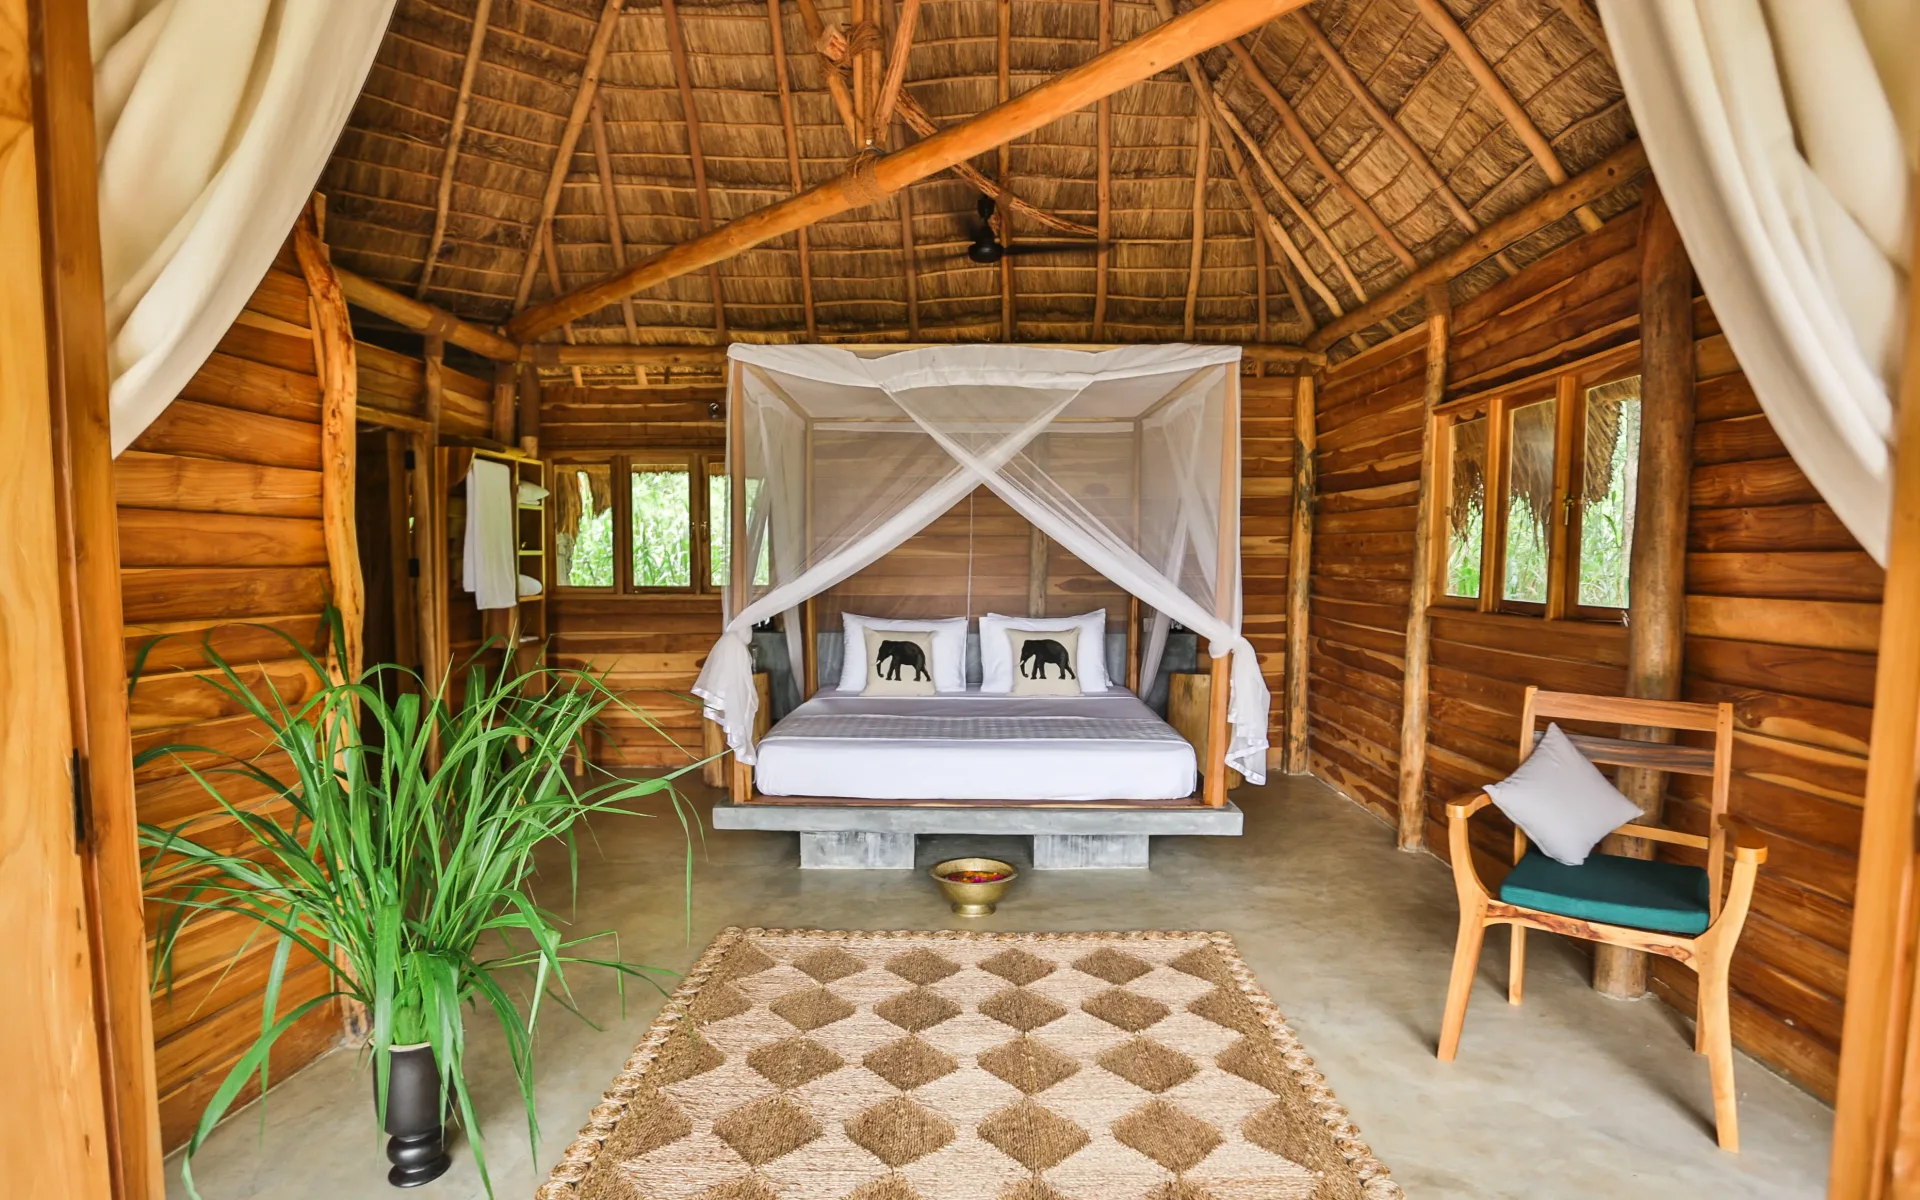 The bungalows at Gal Oya Lodge are adorned in local hardwoods and decorated with traditional pieces, including a hand-woven rug.